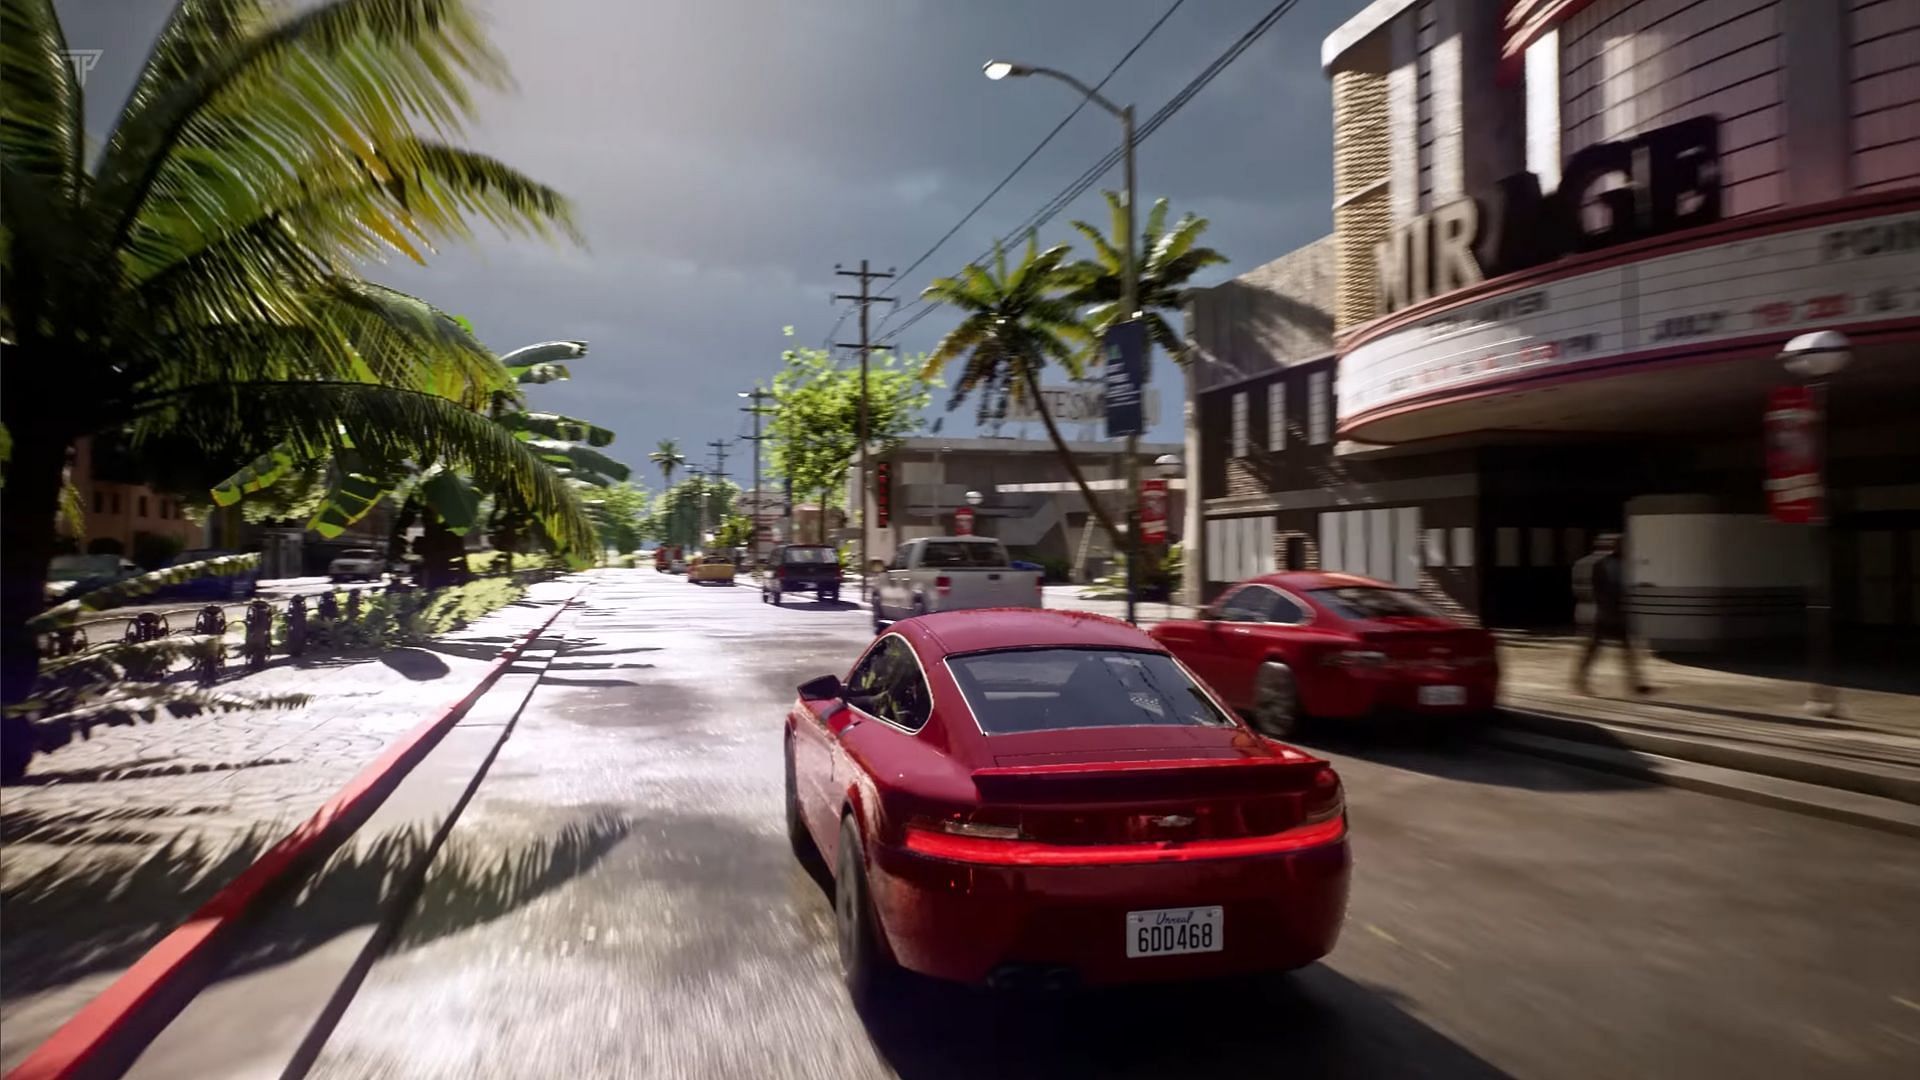 GTA 6 gameplay trailer in Unreal Engine 5 features Lucia in jaw-dropping  details (fan-made concept)